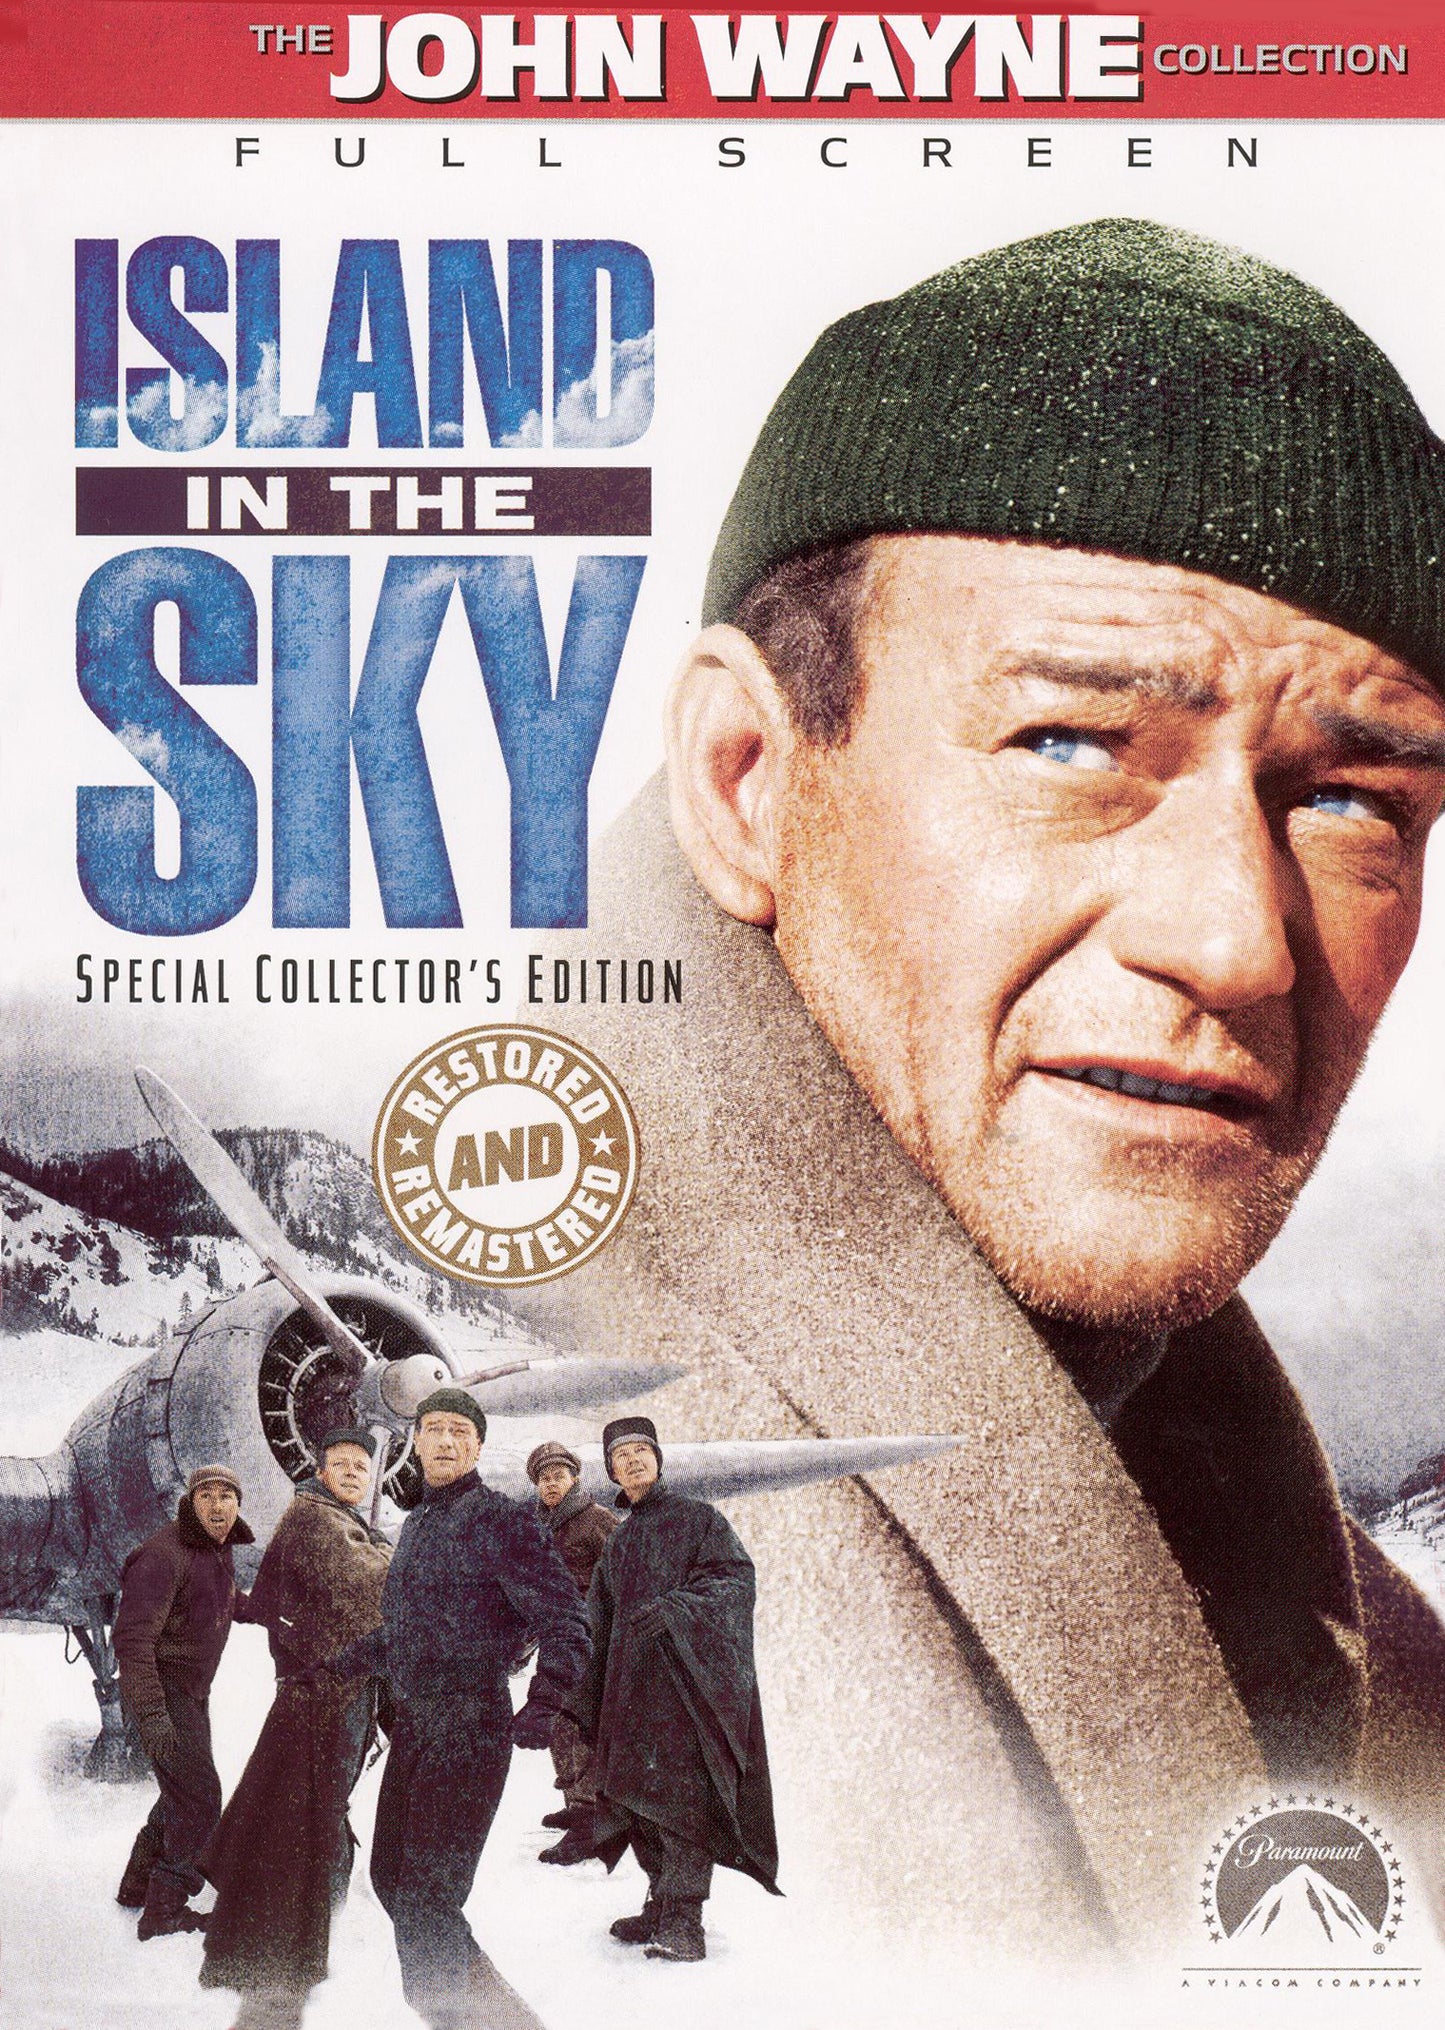 Island in the Sky [Special Collector's Edition] cover art